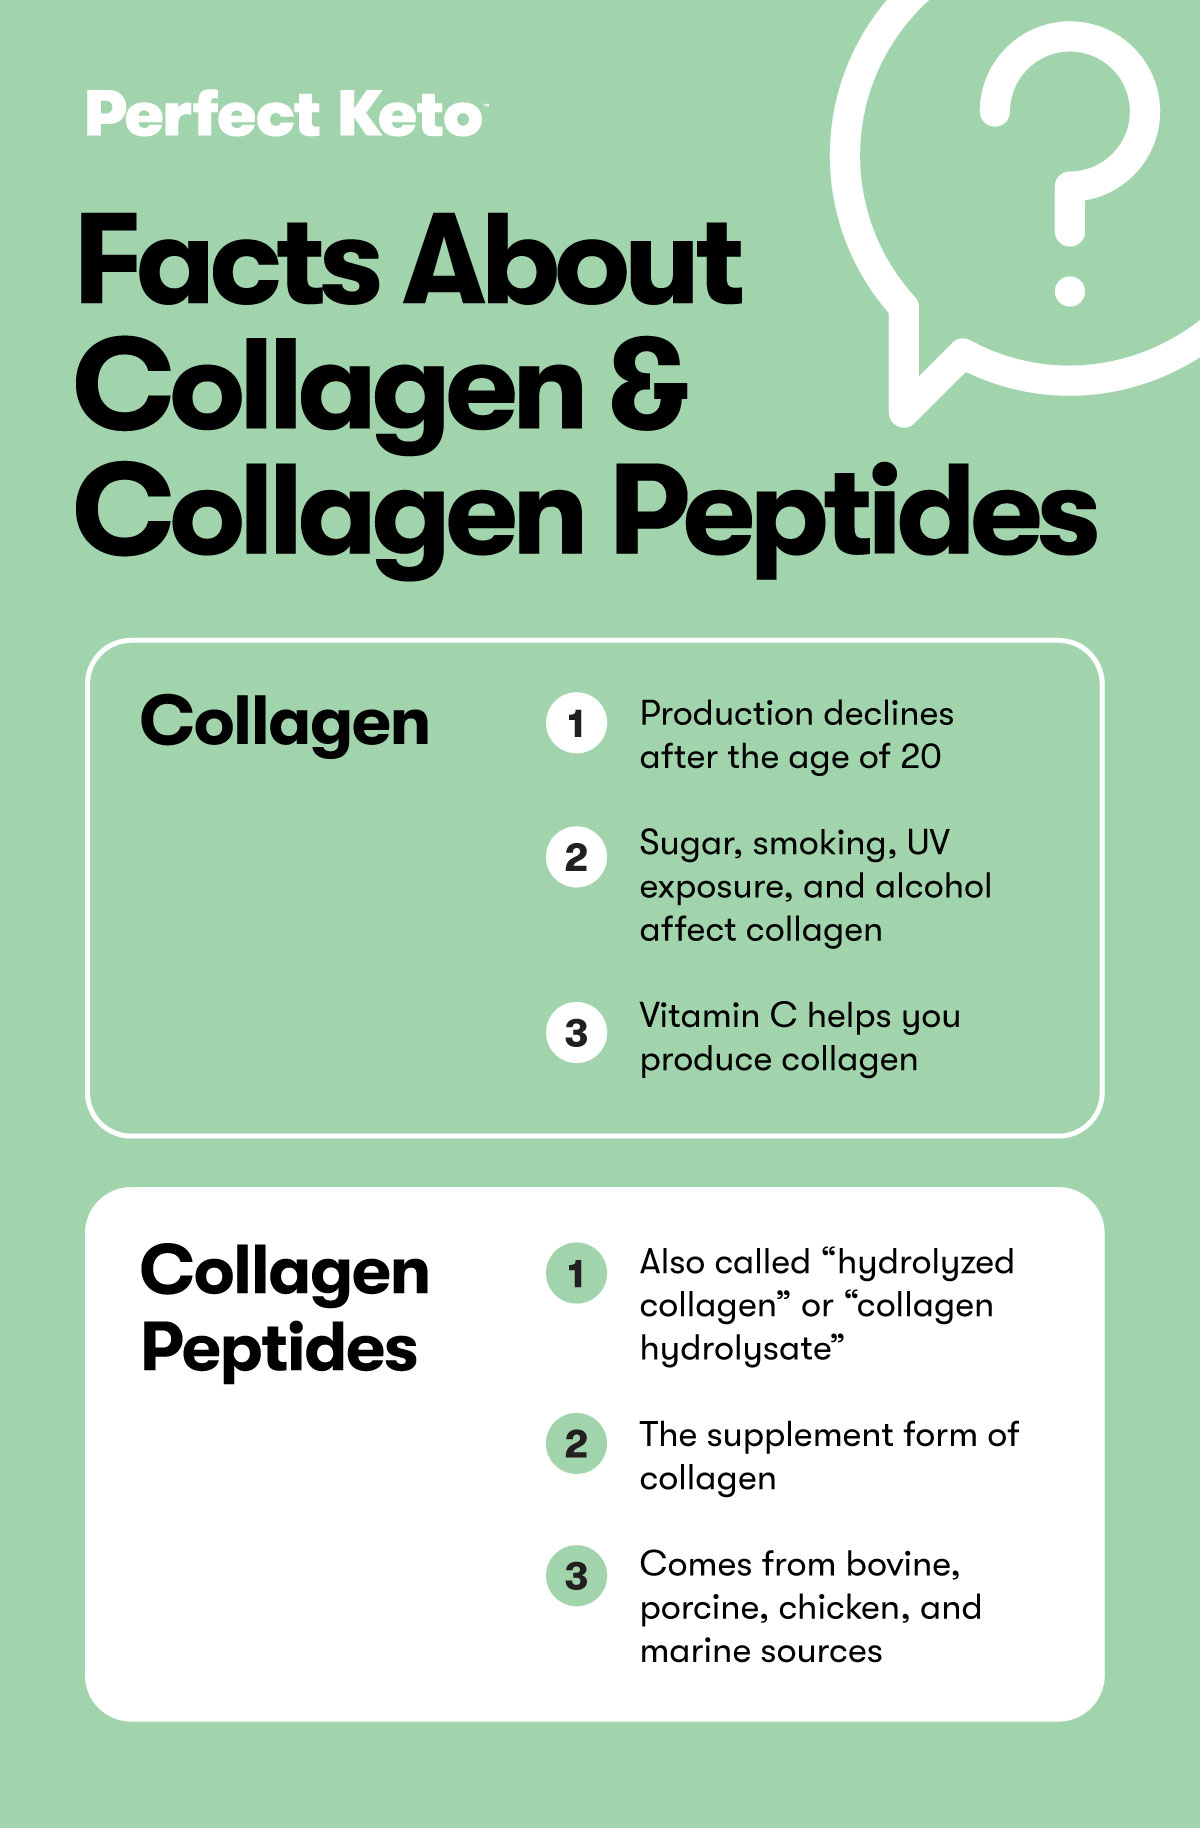 Facts About Collagen and Collagen Peptides